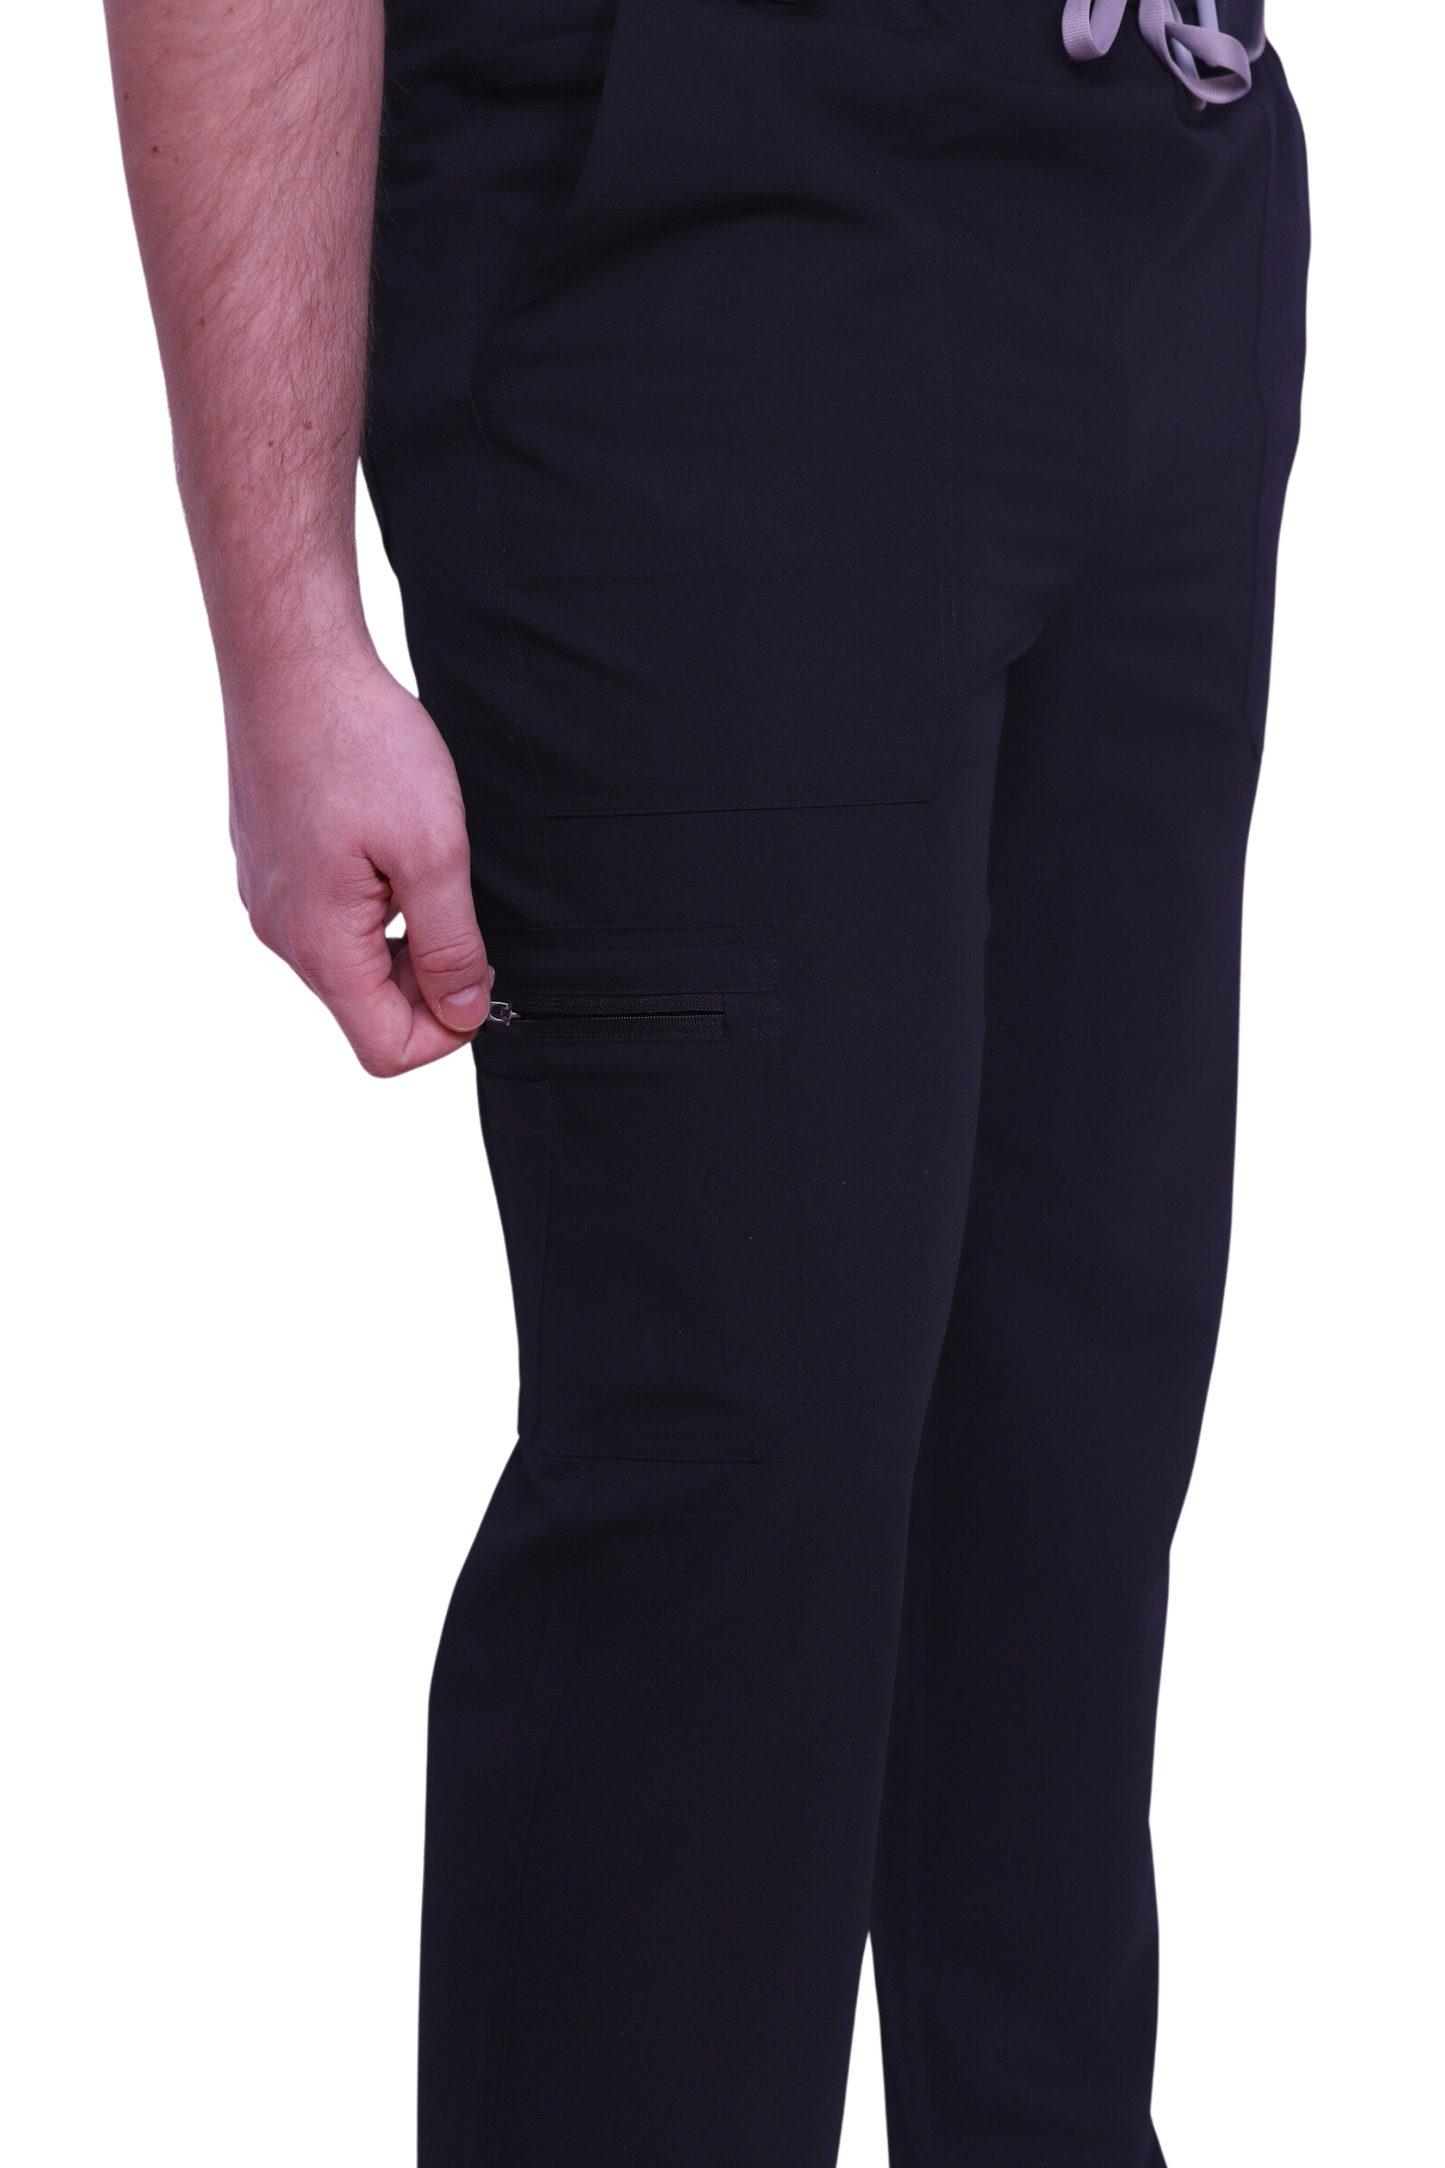 medical work uniform Scrubmates classic fit straight leg black scrub pants for men made to pair perfectly with our classic scrub top. Our exclusive design is trend-forward while still delivering timeless and professional style. Made from a superior quality polyester/rayon/spandex fabric blend, these pants offer unparalleled all-day comfort and allow for ease of movement. The luxe fabric provides the perfect amount of stretch and innovative design offers 8 deep pants pockets best scrubs for men figs